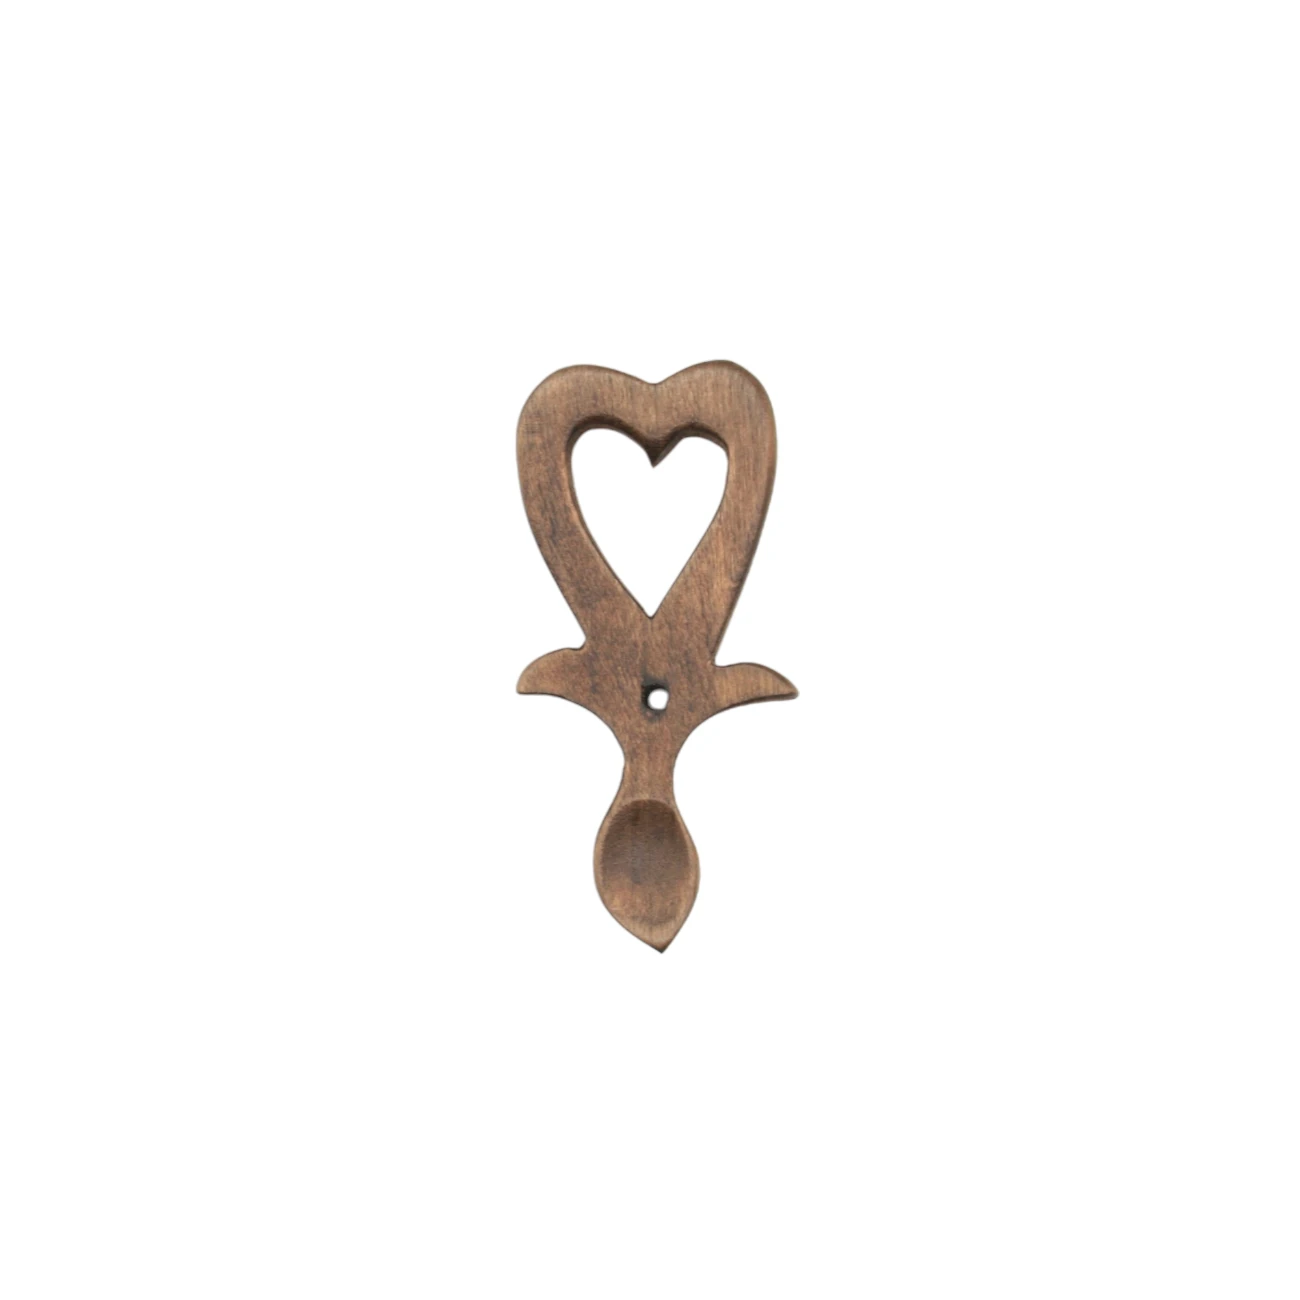 An image of a lovespoon titled Small Heart (2)